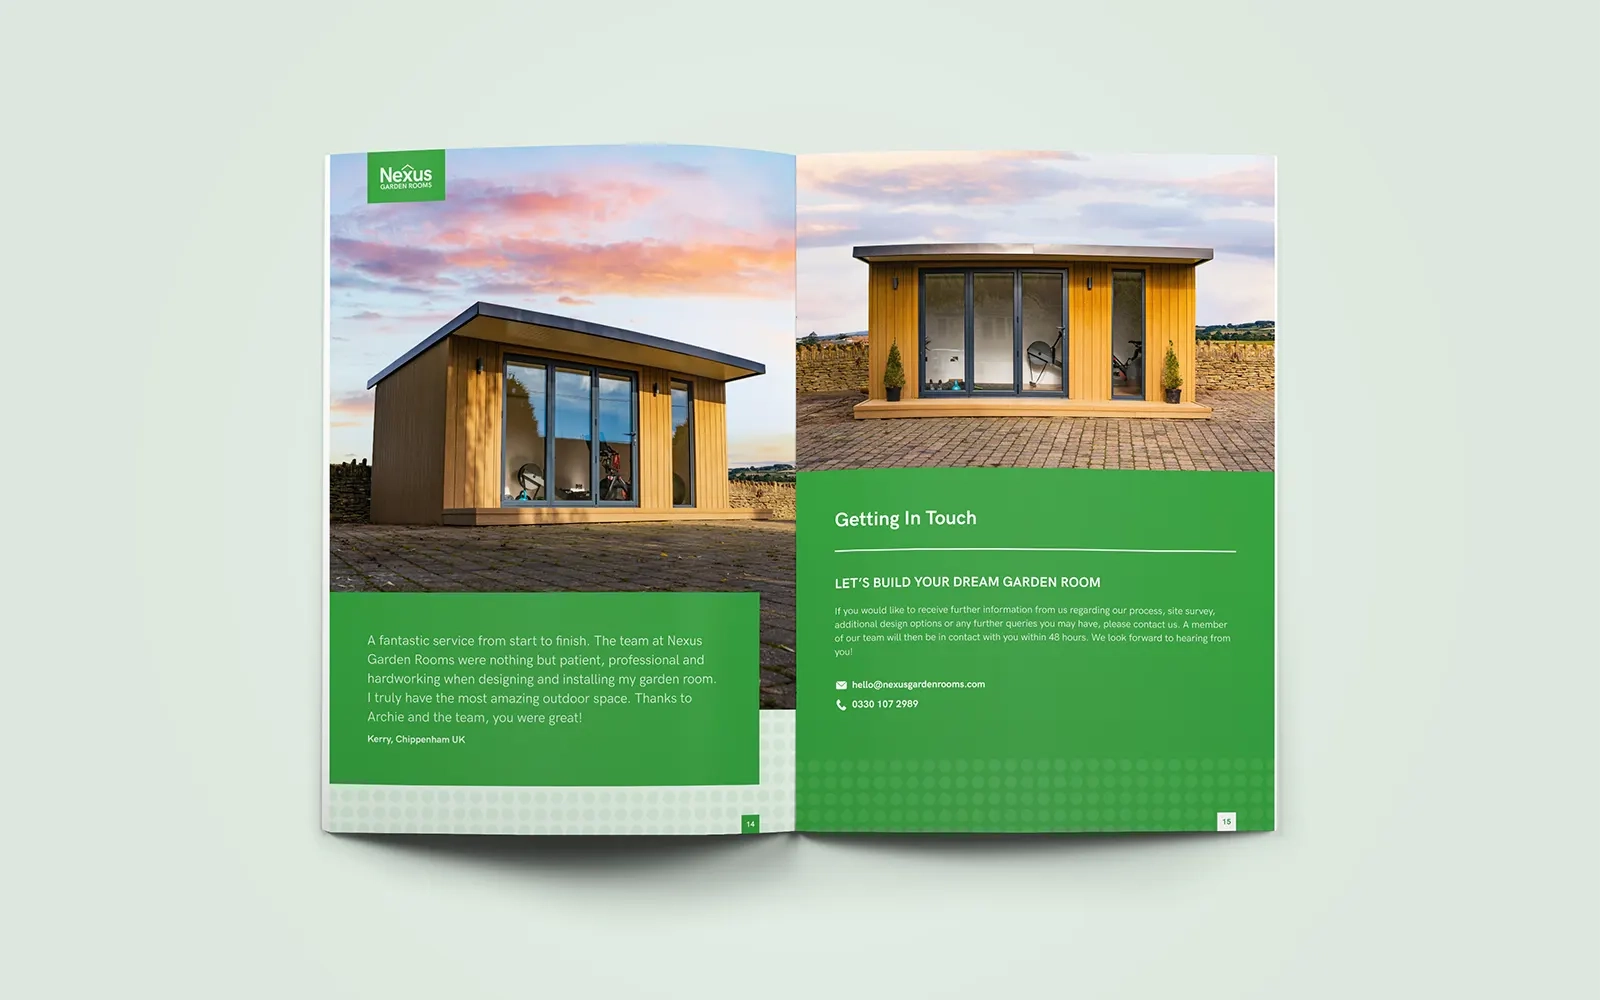  A two page spread of the brochure showing beautiful sunset photos of a garden room along with a customer review and the company's contact information